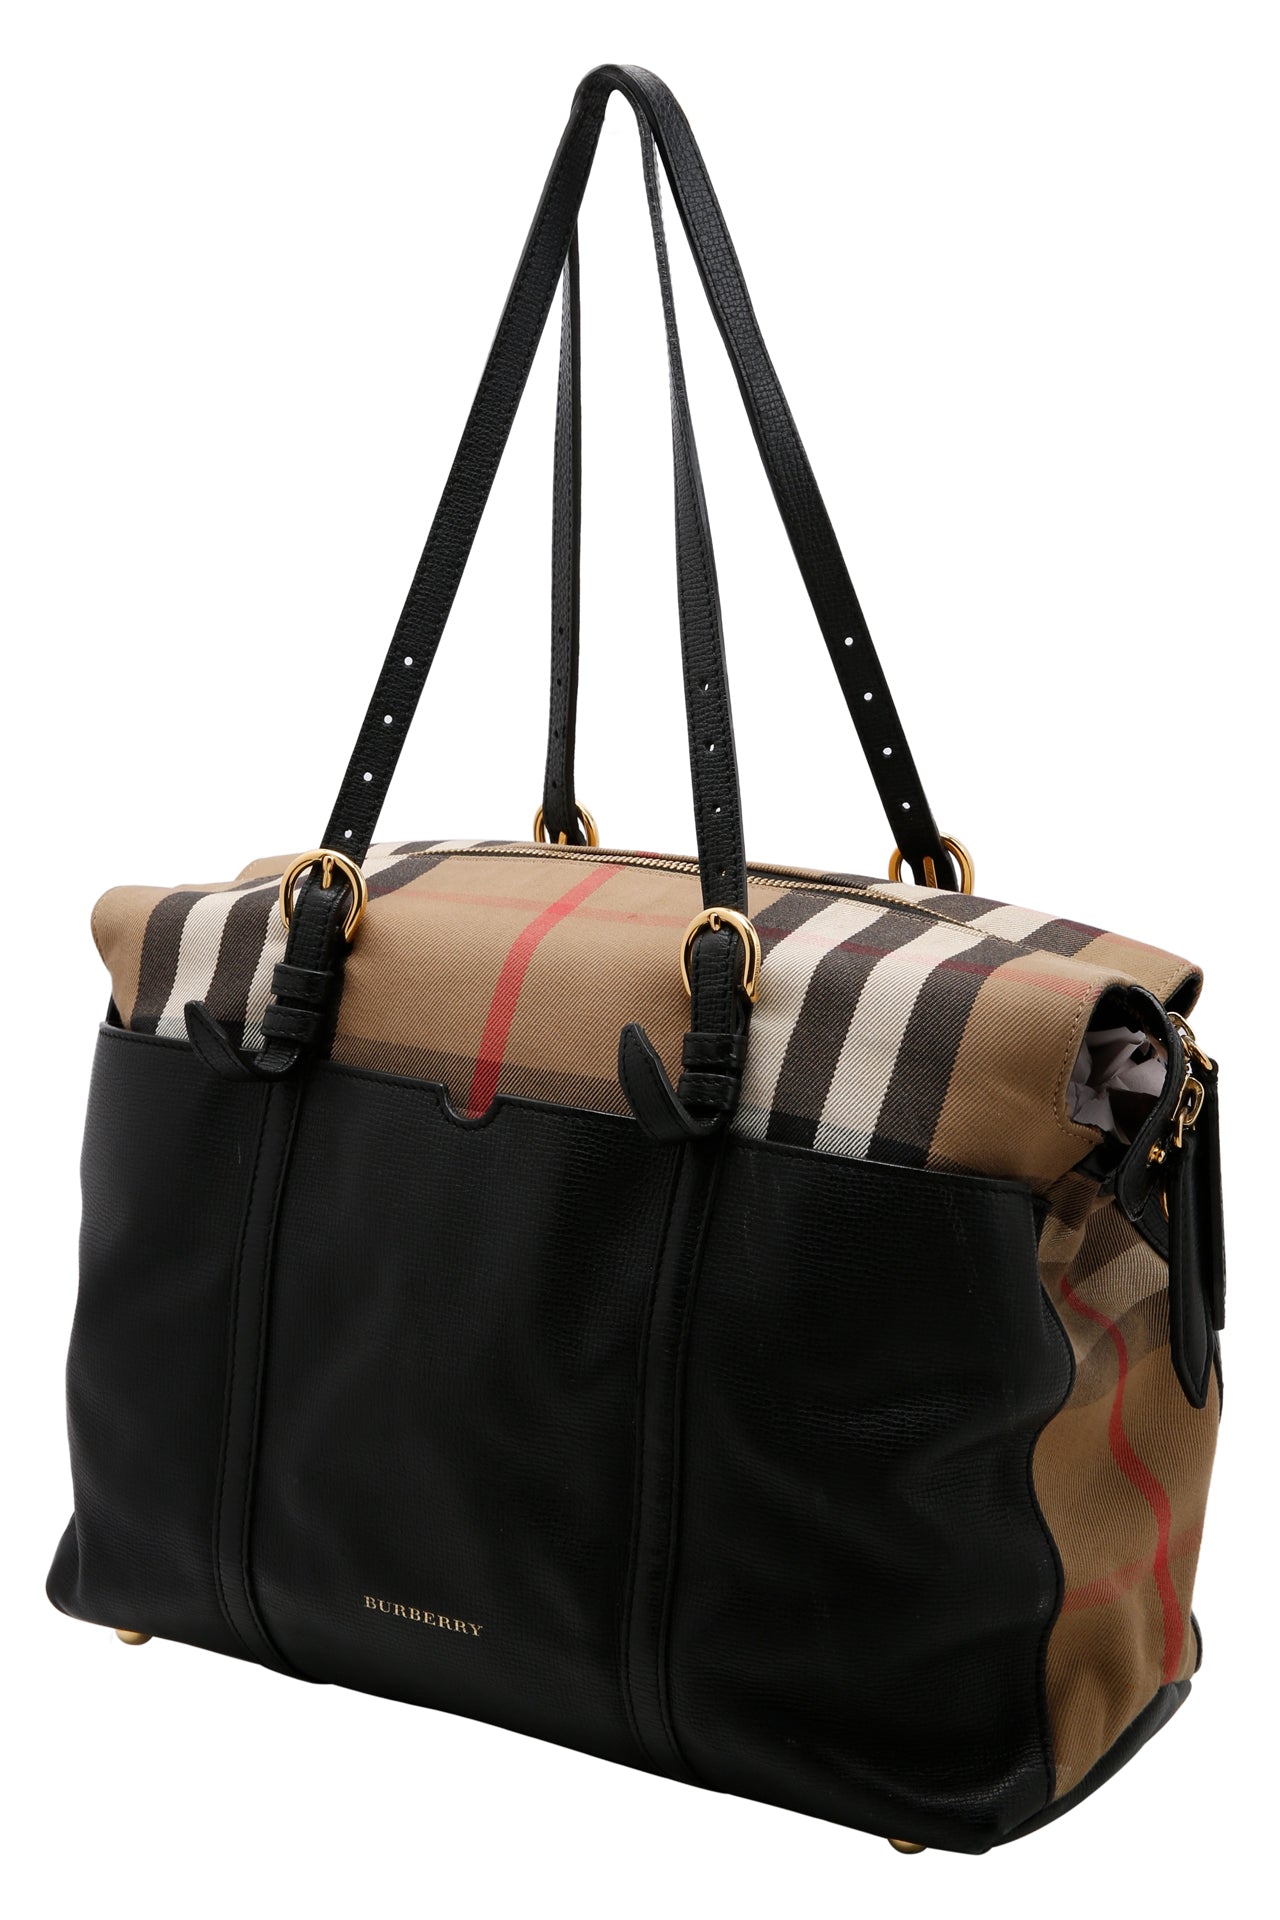 Burberry Beige Black Mason House Check Canvas And Leather Diaper Tote